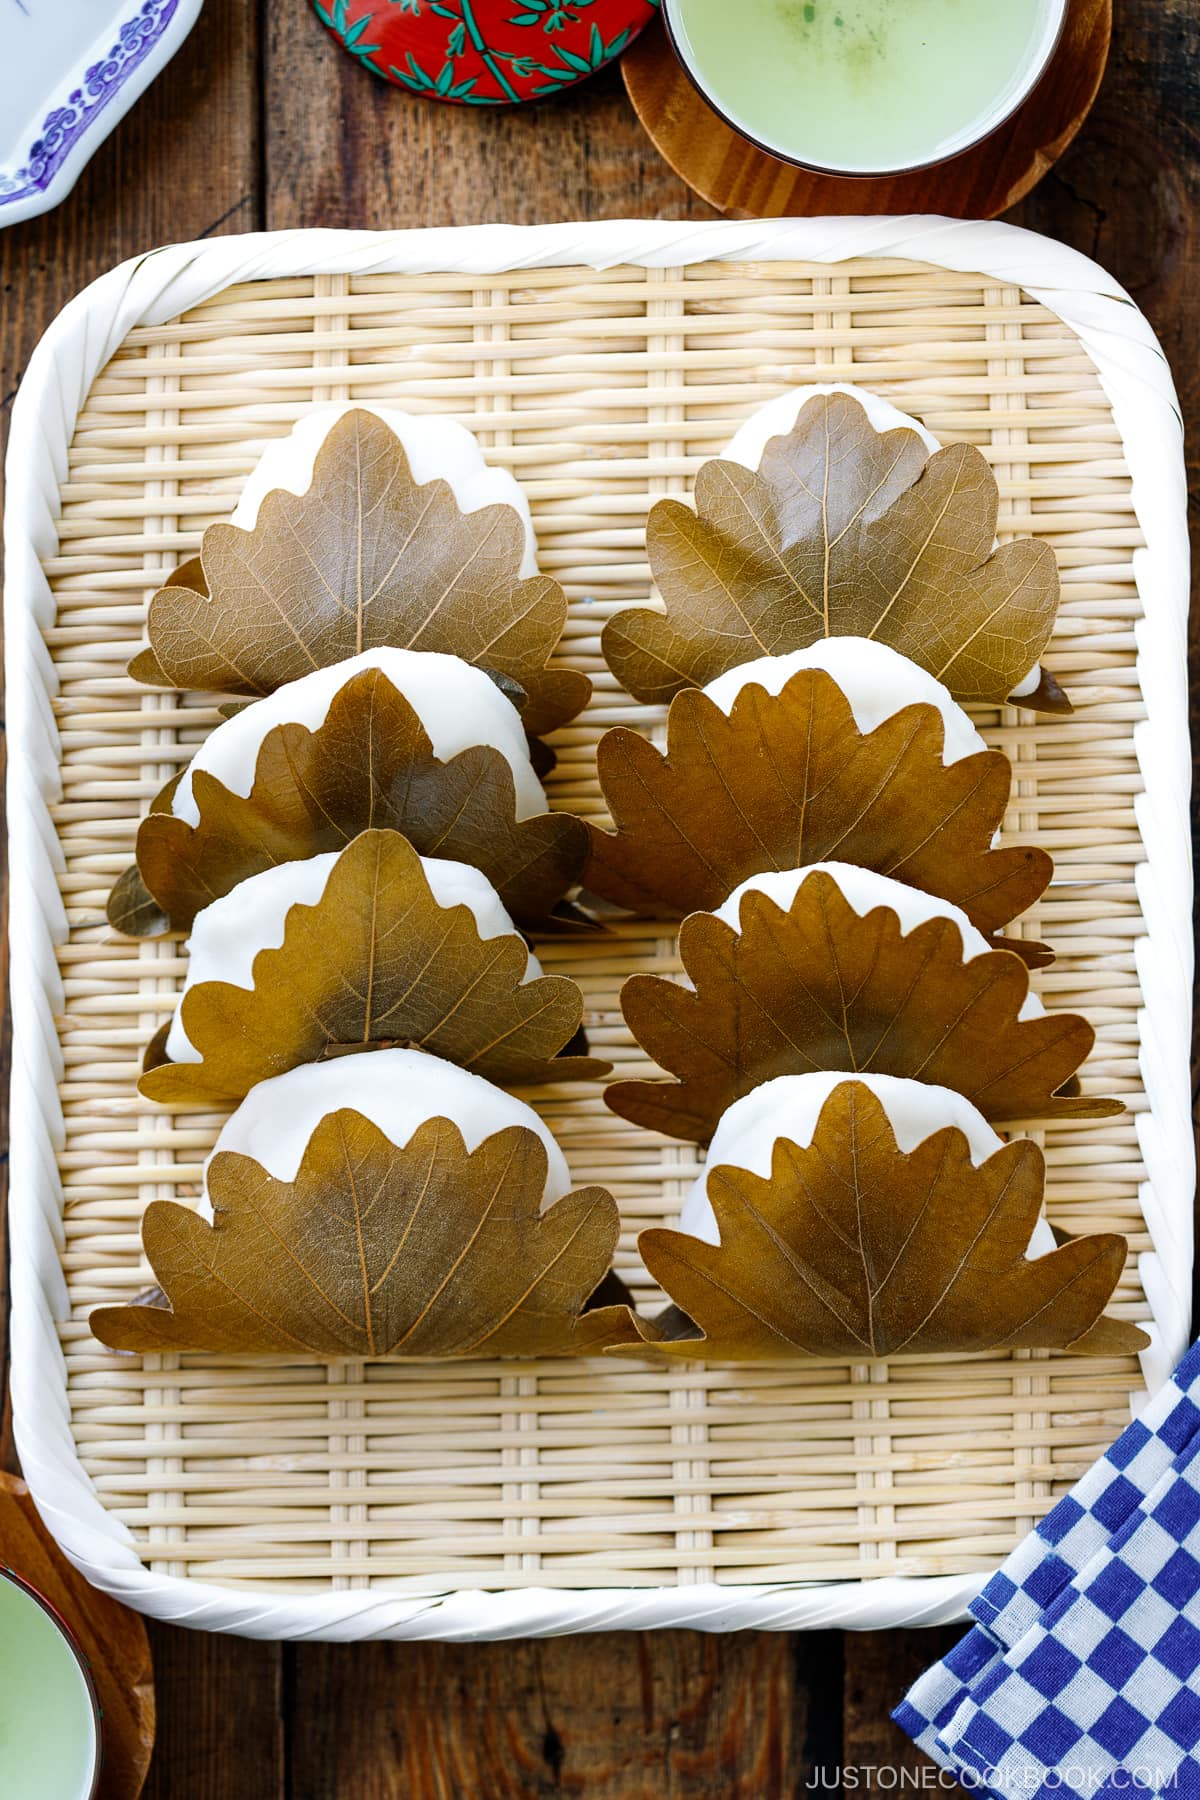 A rectangular bamboo basket containing eight pieces of Kashiwa Mochi, a Japanese sweet red bean filled mochi wrapped in oak leaf.